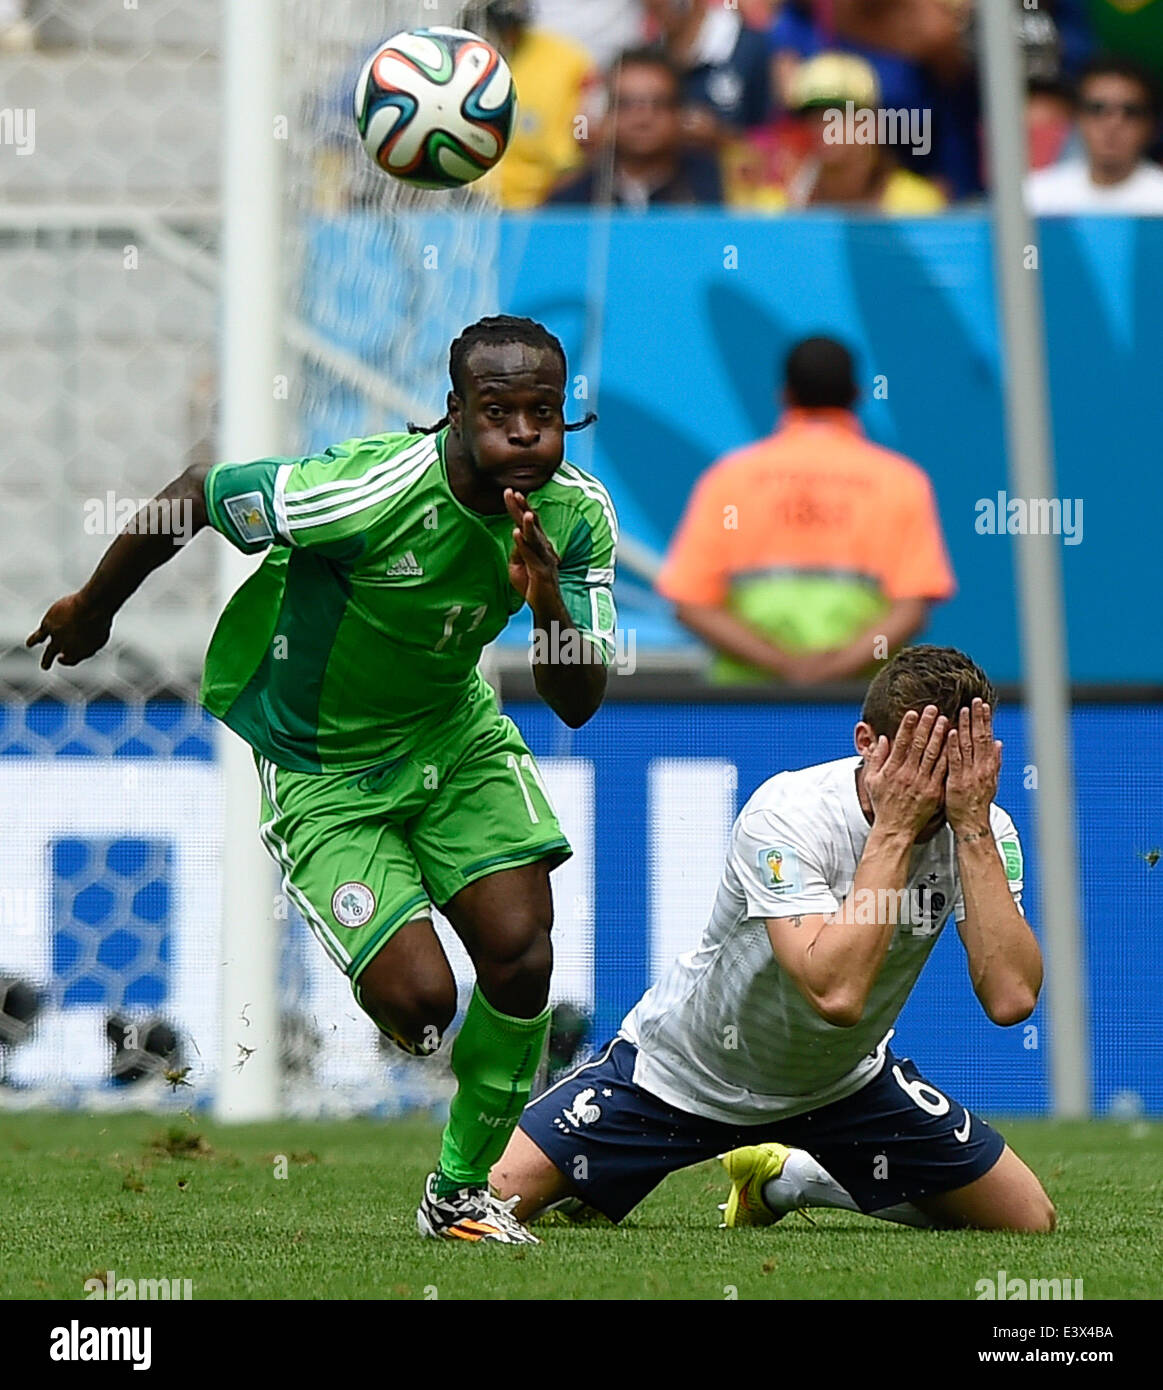 Brasilia, Brazil. 30th June, 2014. France's Yohan Cabaye vies with Nigeria's Victor Moses during a Round of 16 match between France and Nigeria of 2014 FIFA World Cup at the Estadio Nacional Stadium in Brasilia, Brazil, on June 30, 2014. France won 2-0 over Nigeria and qualified for quarter-finals here on Monday. Credit:  Qi Heng/Xinhua/Alamy Live News Stock Photo